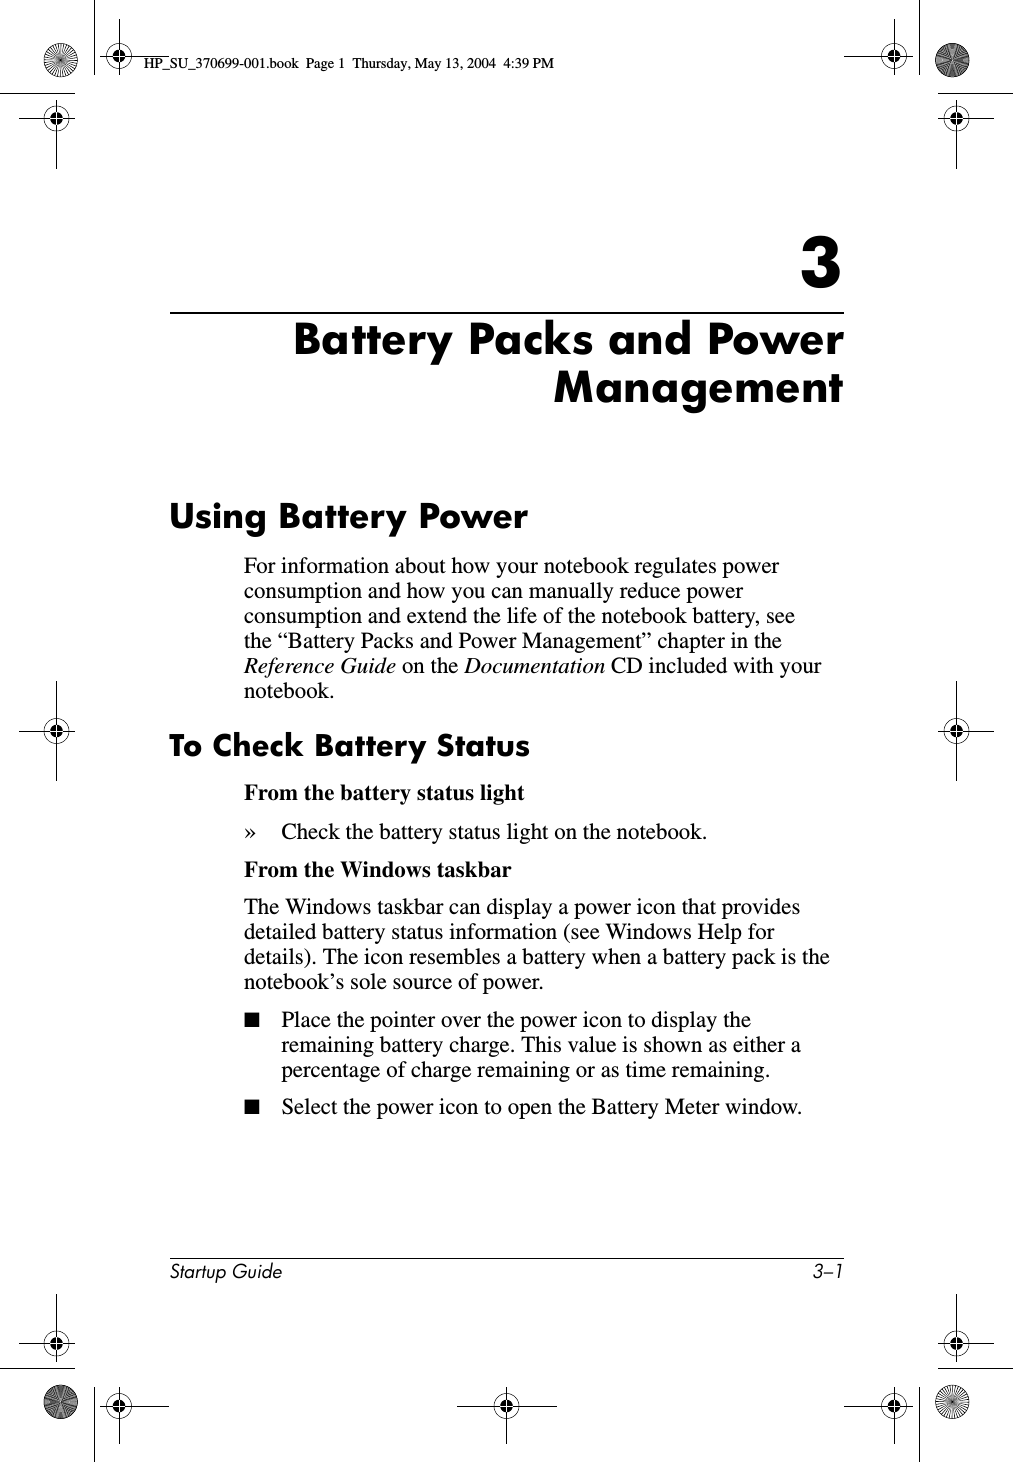 Startup Guide 3–13Battery Packs and PowerManagementUsing Battery PowerFor information about how your notebook regulates power consumption and how you can manually reduce power consumption and extend the life of the notebook battery, see the “Battery Packs and Power Management” chapter in the Reference Guide on the Documentation CD included with your notebook.To Check Battery StatusFrom the battery status light»Check the battery status light on the notebook.From the Windows taskbarThe Windows taskbar can display a power icon that provides detailed battery status information (see Windows Help for details). The icon resembles a battery when a battery pack is the notebook’s sole source of power.■Place the pointer over the power icon to display the remaining battery charge. This value is shown as either a percentage of charge remaining or as time remaining.■Select the power icon to open the Battery Meter window.HP_SU_370699-001.book  Page 1  Thursday, May 13, 2004  4:39 PM